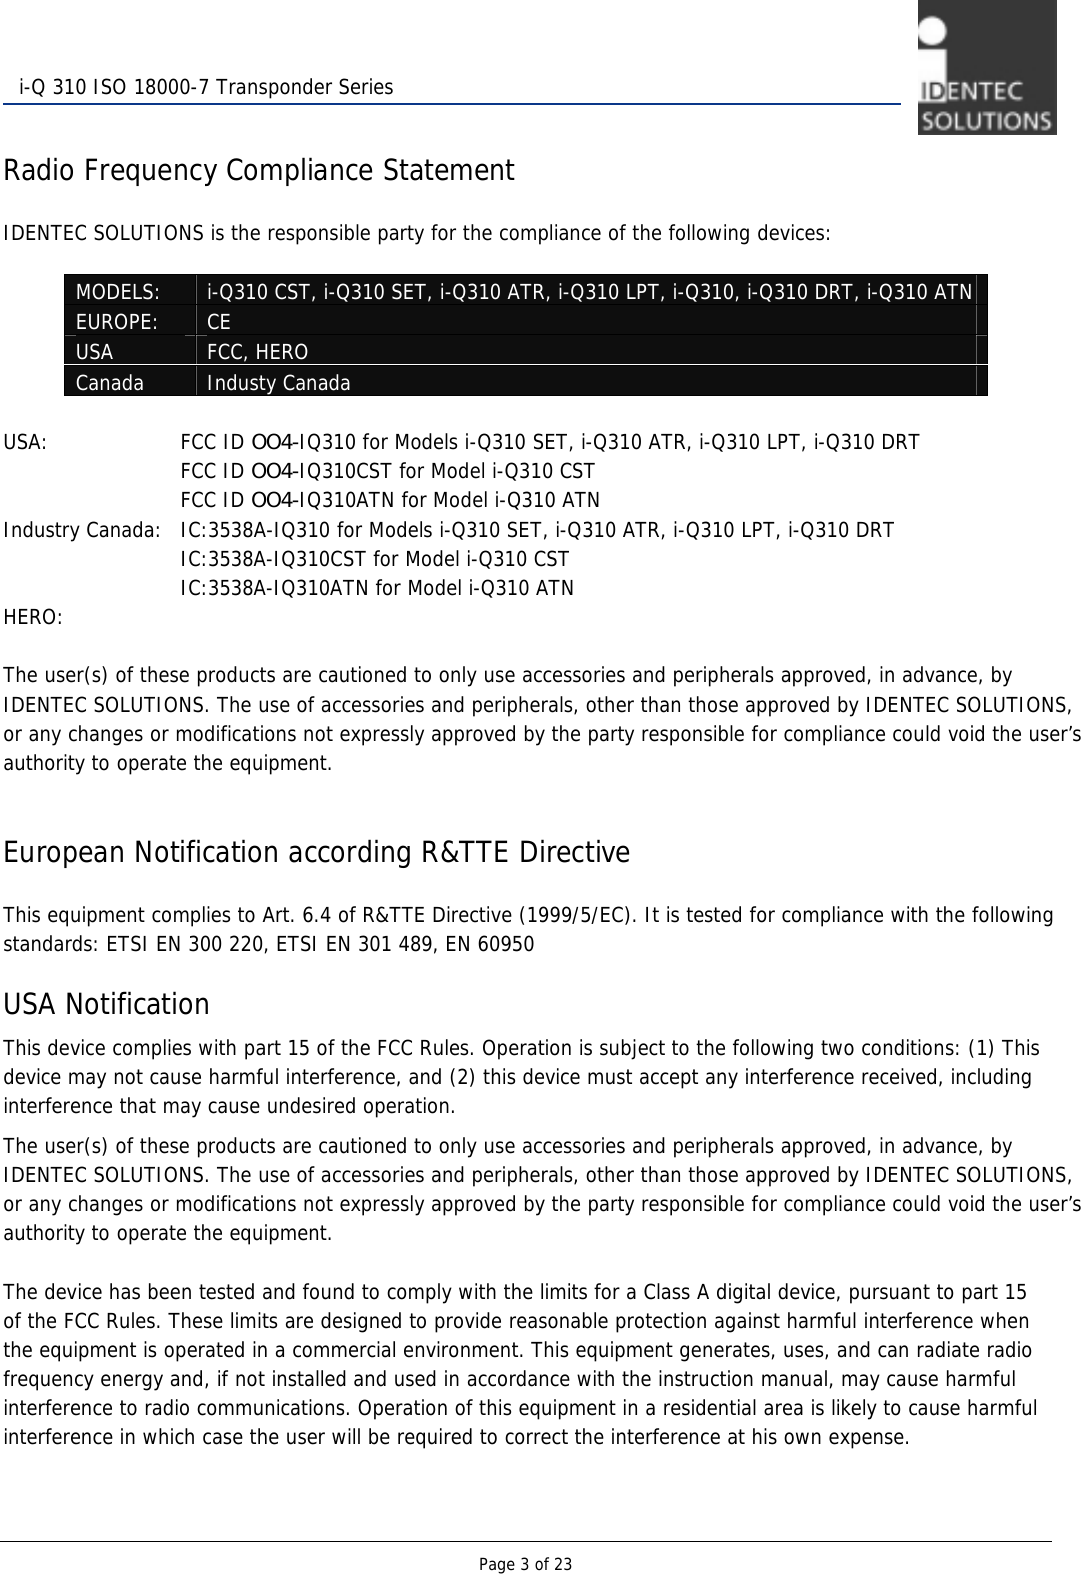   Page 3 of 23  i-Q 310 ISO 18000-7 Transponder Series  Radio Frequency Compliance Statement  IDENTEC SOLUTIONS is the responsible party for the compliance of the following devices:  MODELS:  i-Q310 CST, i-Q310 SET, i-Q310 ATR, i-Q310 LPT, i-Q310, i-Q310 DRT, i-Q310 ATN EUROPE:  CE  USA  FCC, HERO Canada  Industy Canada  USA:      FCC ID OO4-IQ310 for Models i-Q310 SET, i-Q310 ATR, i-Q310 LPT, i-Q310 DRT       FCC ID OO4-IQ310CST for Model i-Q310 CST       FCC ID OO4-IQ310ATN for Model i-Q310 ATN Industry Canada:   IC:3538A-IQ310 for Models i-Q310 SET, i-Q310 ATR, i-Q310 LPT, i-Q310 DRT       IC:3538A-IQ310CST for Model i-Q310 CST       IC:3538A-IQ310ATN for Model i-Q310 ATN HERO:  The user(s) of these products are cautioned to only use accessories and peripherals approved, in advance, by IDENTEC SOLUTIONS. The use of accessories and peripherals, other than those approved by IDENTEC SOLUTIONS, or any changes or modifications not expressly approved by the party responsible for compliance could void the user’s authority to operate the equipment.   European Notification according R&amp;TTE Directive  This equipment complies to Art. 6.4 of R&amp;TTE Directive (1999/5/EC). It is tested for compliance with the following standards: ETSI EN 300 220, ETSI EN 301 489, EN 60950  USA Notification This device complies with part 15 of the FCC Rules. Operation is subject to the following two conditions: (1) This device may not cause harmful interference, and (2) this device must accept any interference received, including interference that may cause undesired operation. The user(s) of these products are cautioned to only use accessories and peripherals approved, in advance, by IDENTEC SOLUTIONS. The use of accessories and peripherals, other than those approved by IDENTEC SOLUTIONS, or any changes or modifications not expressly approved by the party responsible for compliance could void the user’s authority to operate the equipment.  The device has been tested and found to comply with the limits for a Class A digital device, pursuant to part 15 of the FCC Rules. These limits are designed to provide reasonable protection against harmful interference when the equipment is operated in a commercial environment. This equipment generates, uses, and can radiate radio frequency energy and, if not installed and used in accordance with the instruction manual, may cause harmful interference to radio communications. Operation of this equipment in a residential area is likely to cause harmful interference in which case the user will be required to correct the interference at his own expense. 